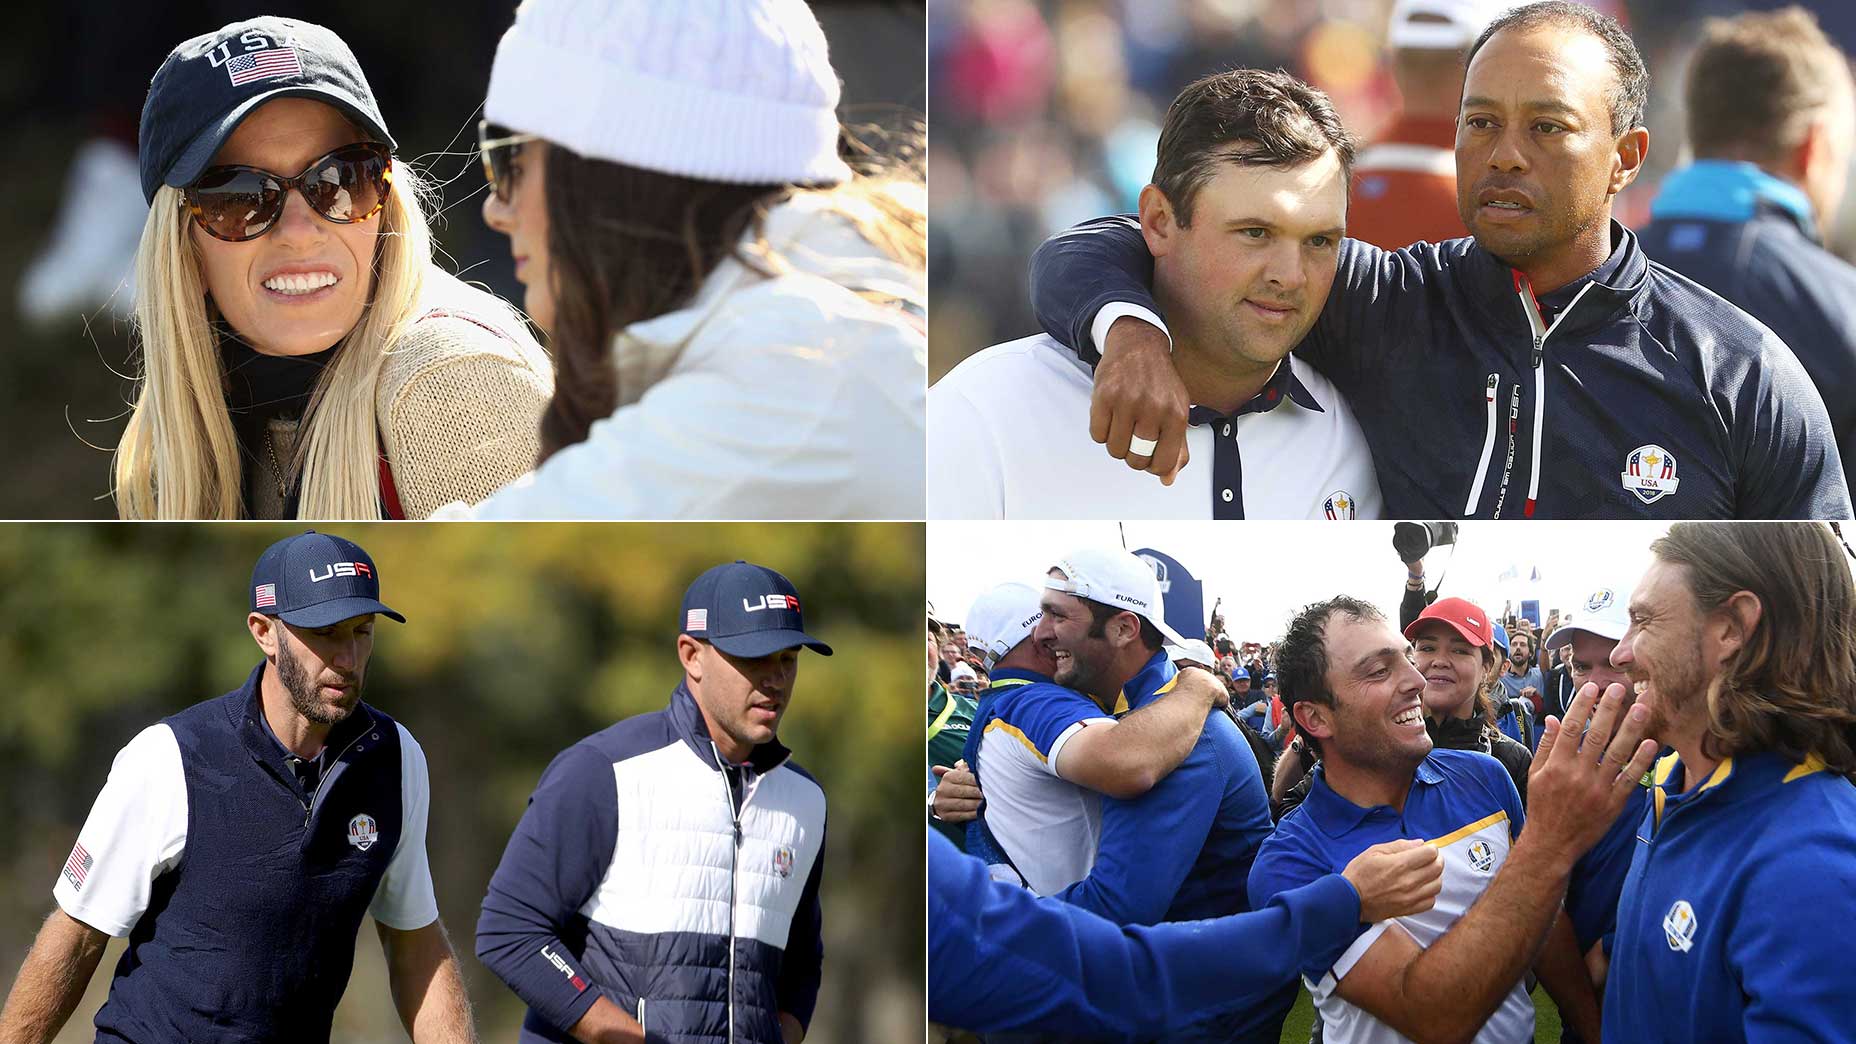 7 controversial or memorable moments from the 2018 Ryder Cup